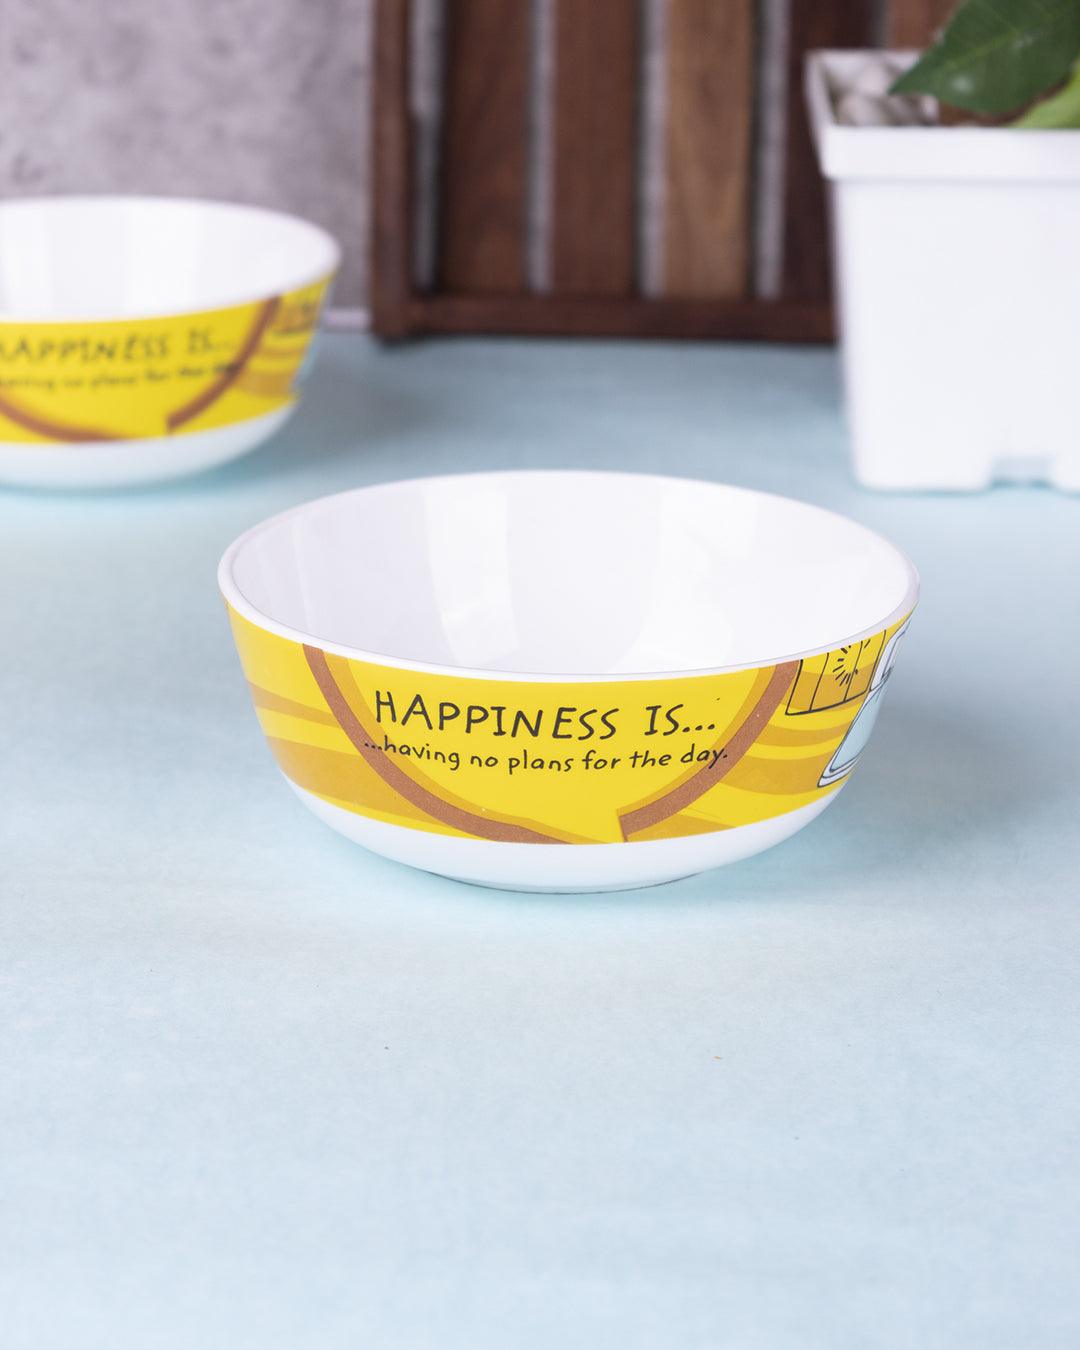 Market 99 - 'HAPPINESS IS … having no plans for the day' Graphic Print Serving Bowl Katoris In Ceramic (Set of 4, 340 mL) - MARKET 99